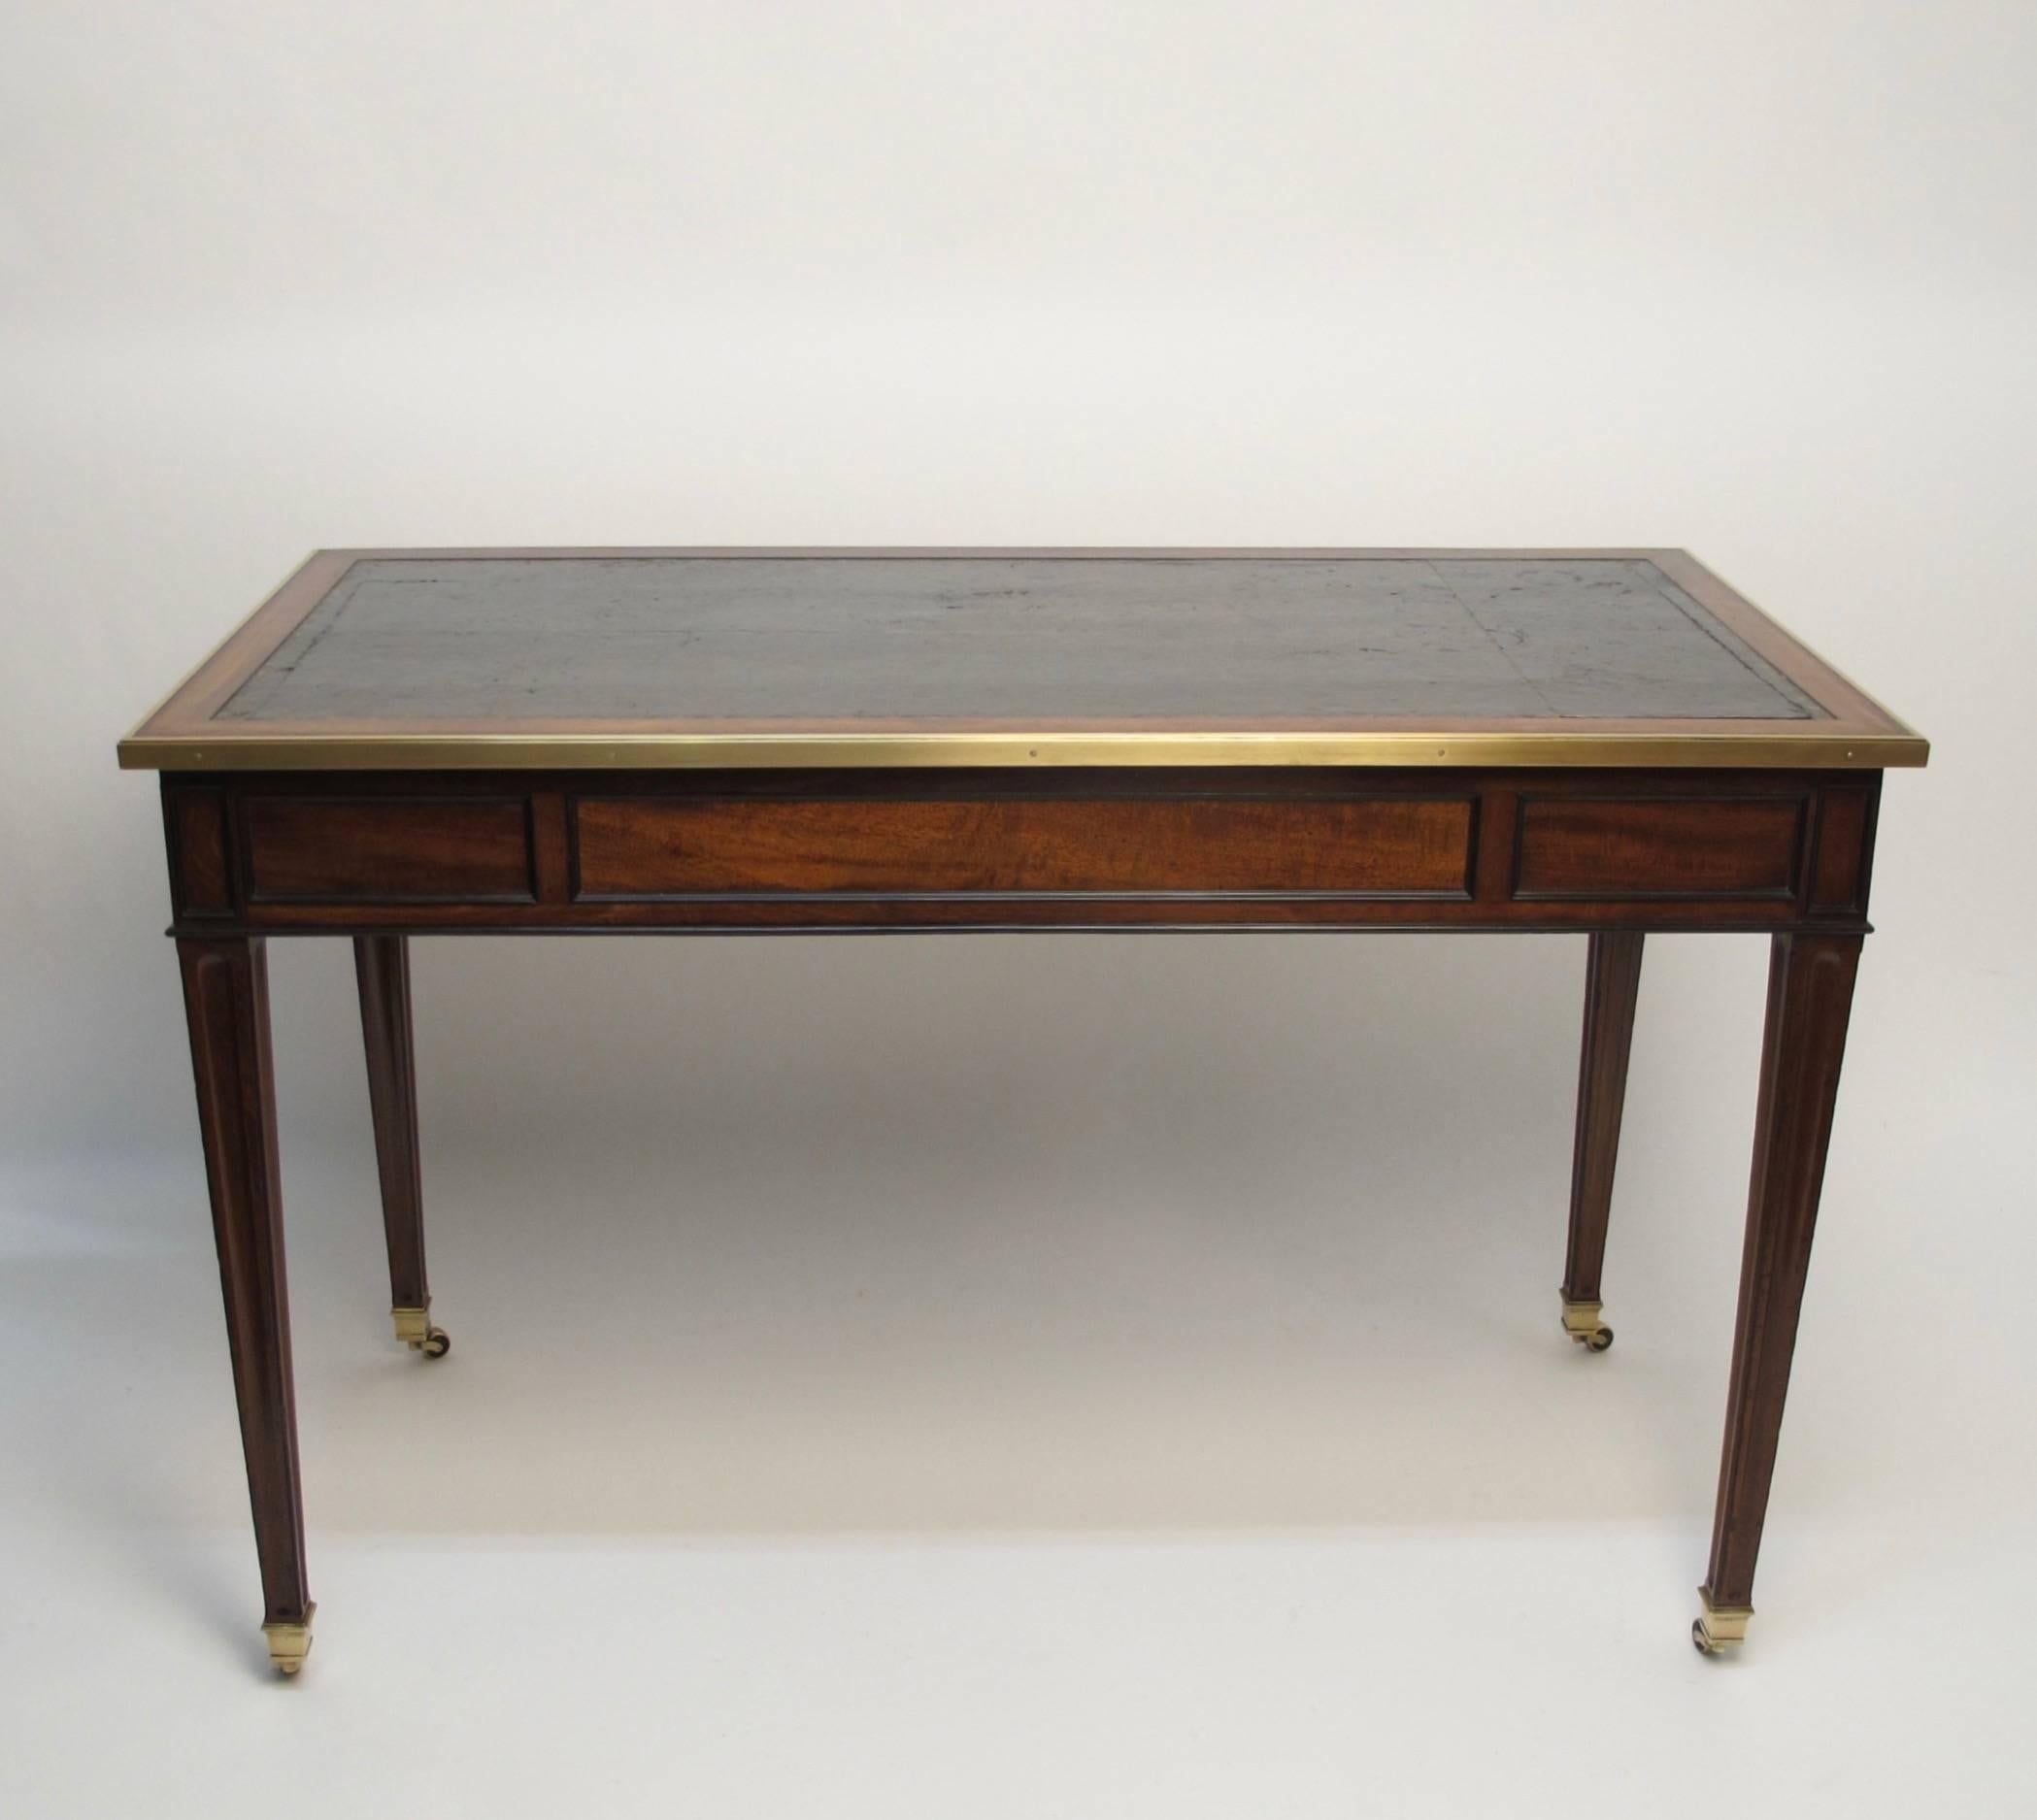 Mahogany writing desk with inset green leather top having gilt embossing and brass trim. Two short drawers flanking center drawer with ebonized moldings, tapering fluted legs ending in brass sabots with casters, France, circa 1880.